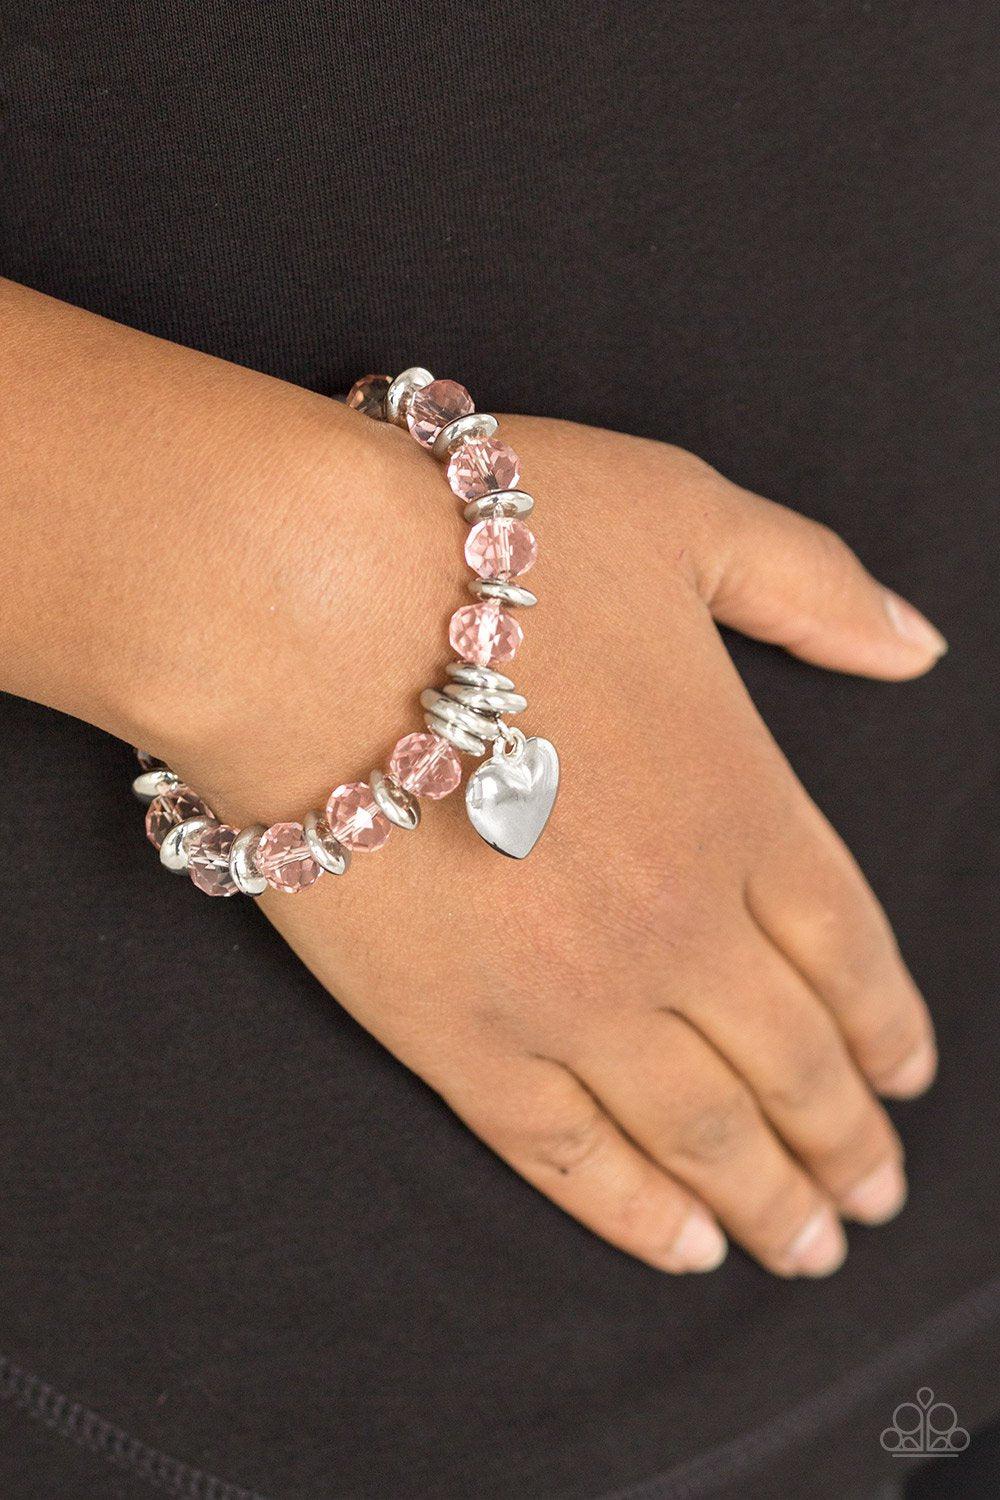 Need I Say Amour Pink Heart Bracelet - Paparazzi Accessories-CarasShop.com - $5 Jewelry by Cara Jewels